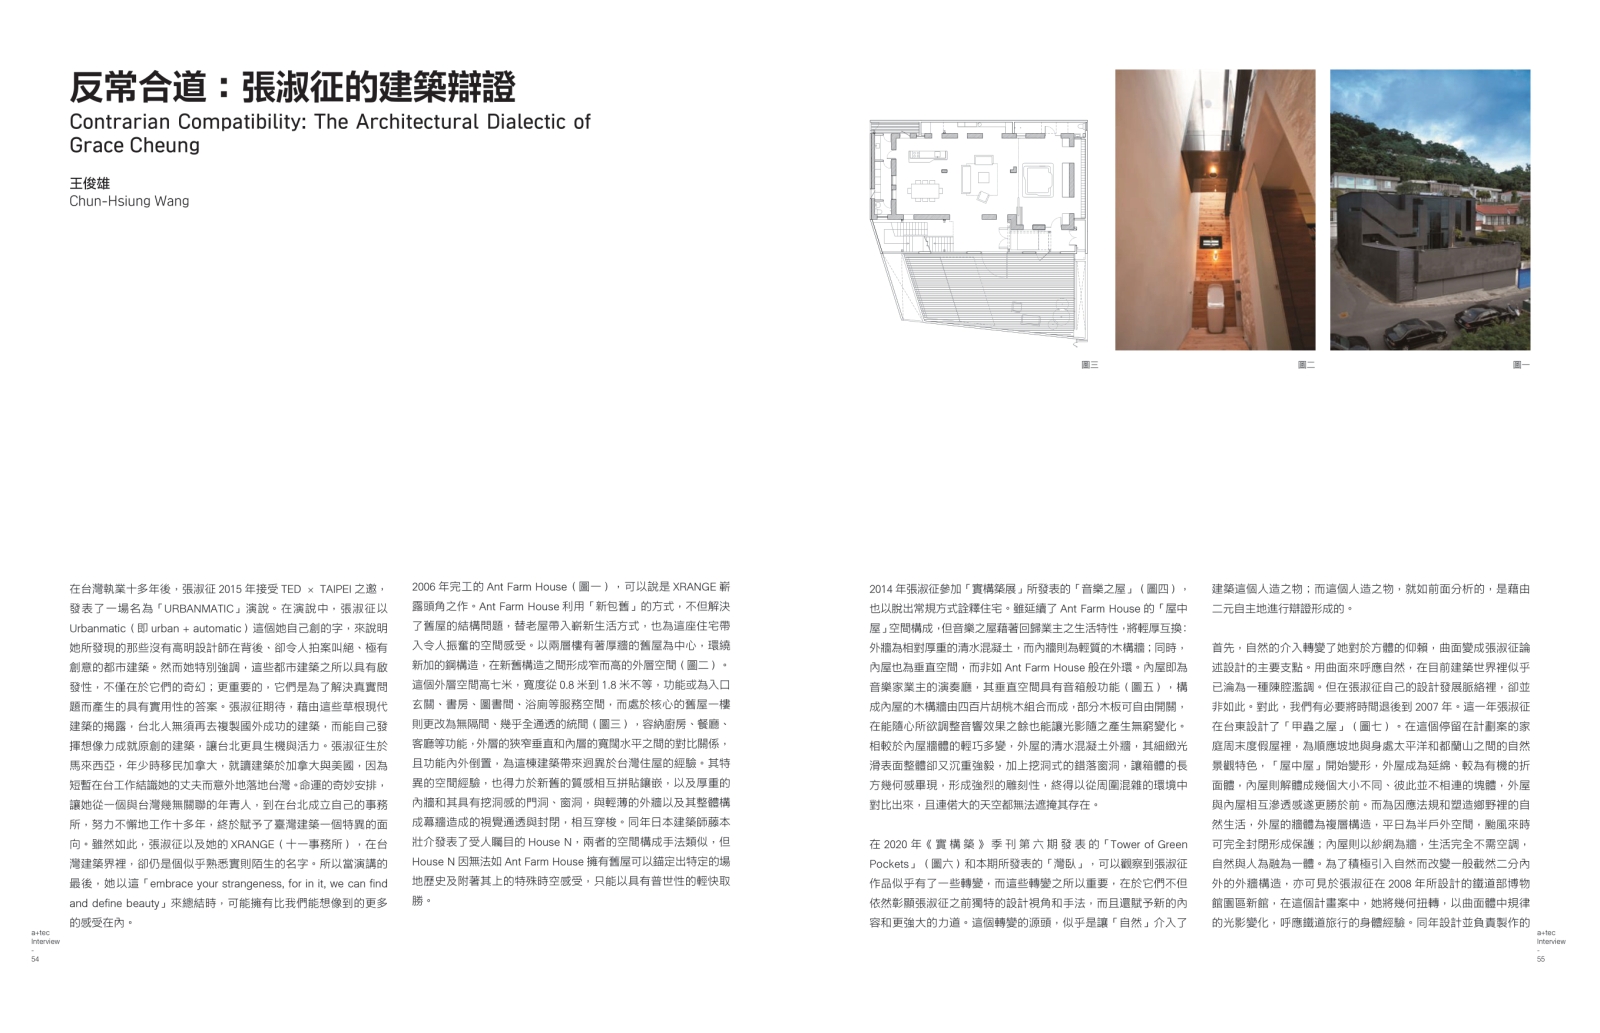 The archi-tec magazine reported the Wandering Walls